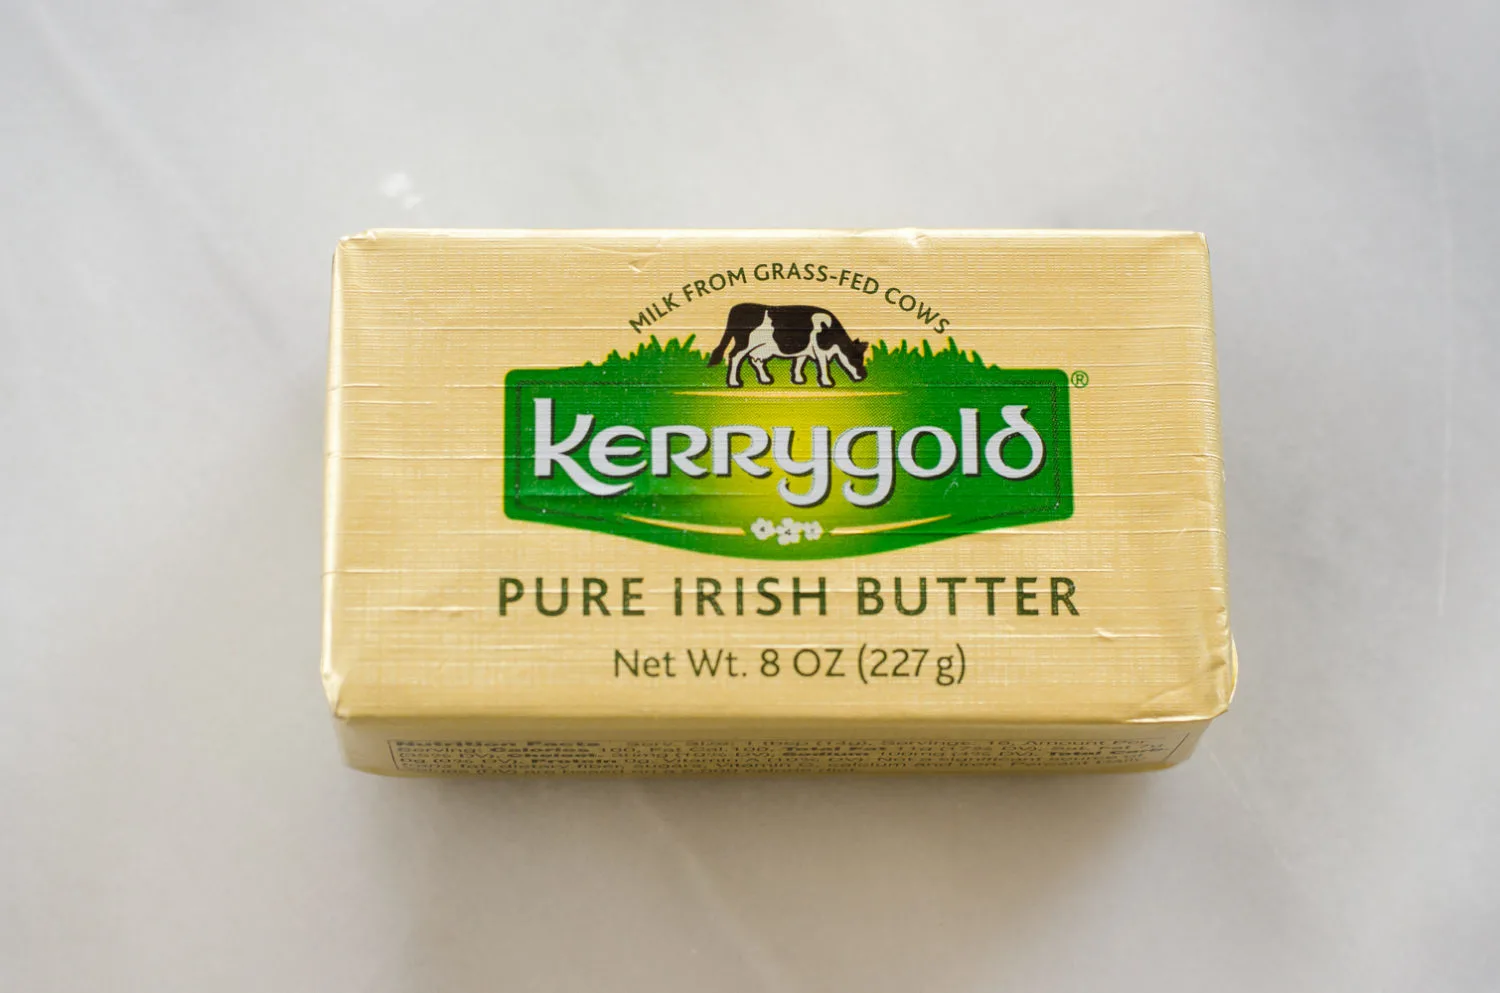 California) Picked up a box of Kerrygold butter today. I thought